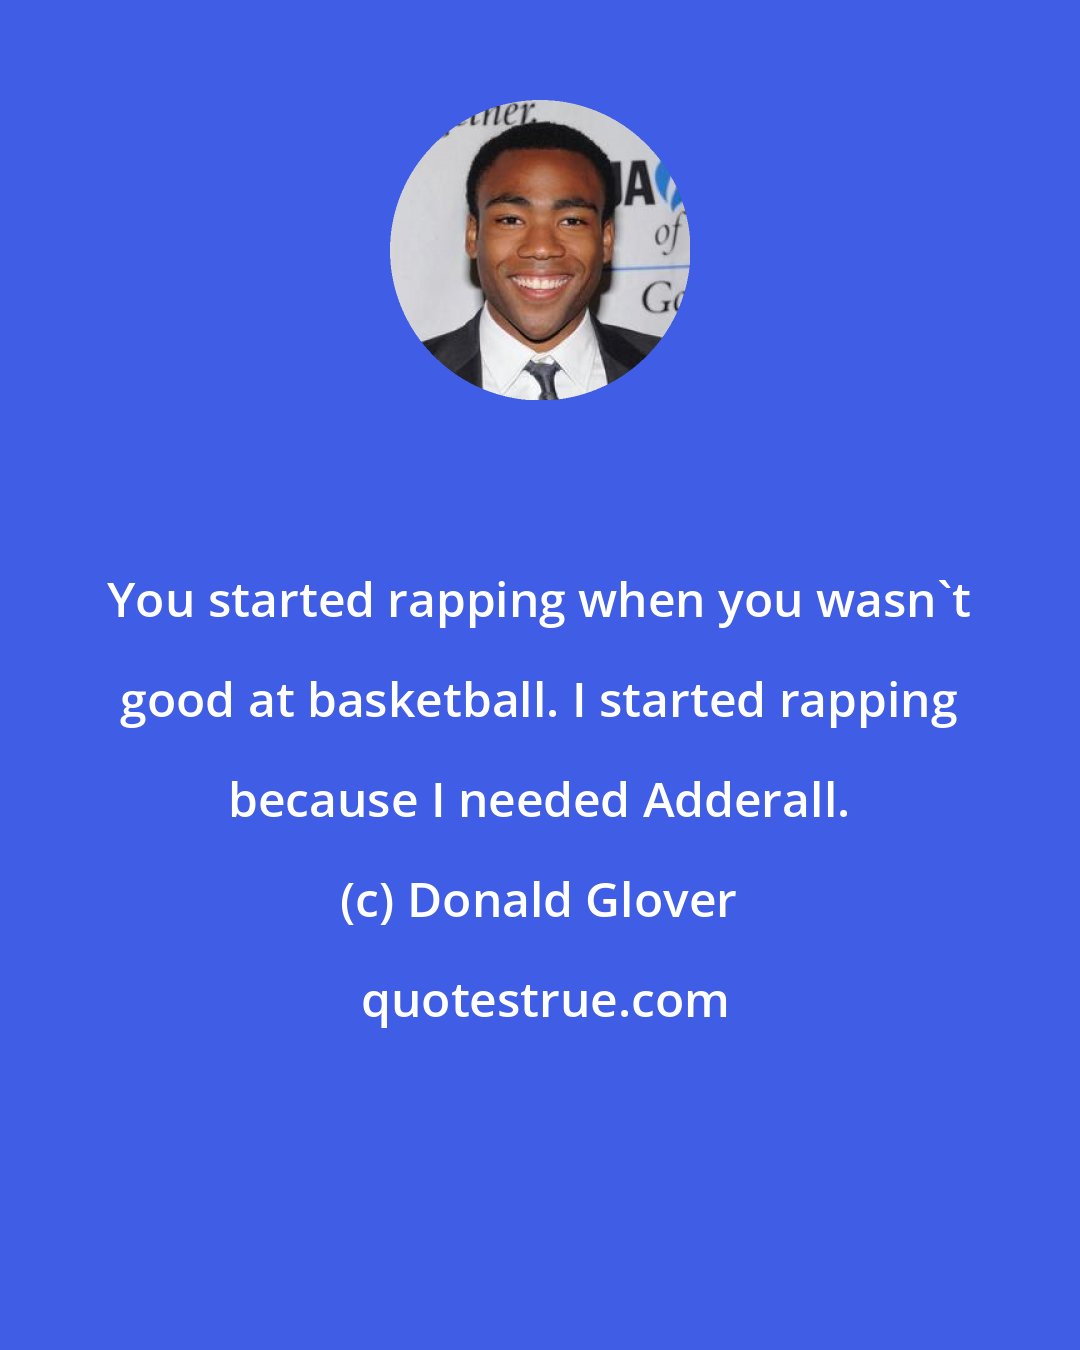 Donald Glover: You started rapping when you wasn't good at basketball. I started rapping because I needed Adderall.